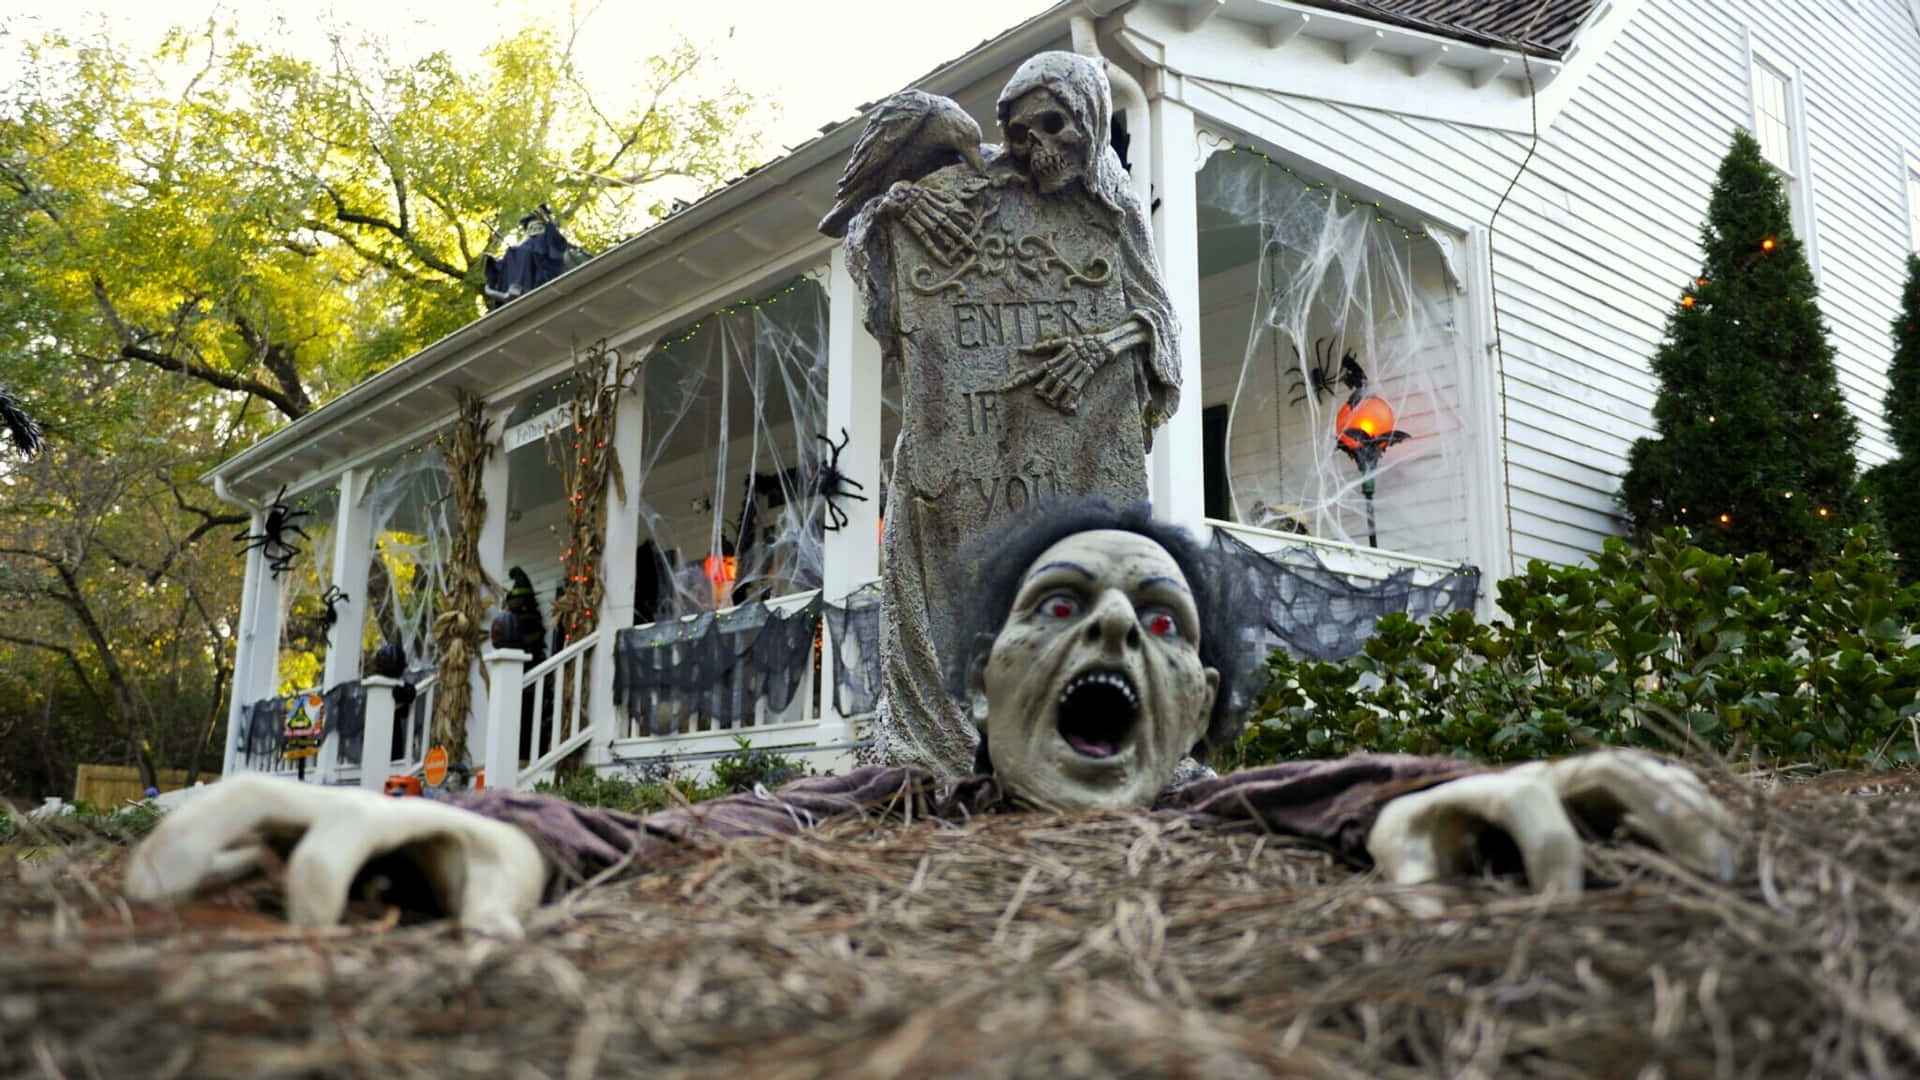 A House With A Halloween Decoration In The Front Yard